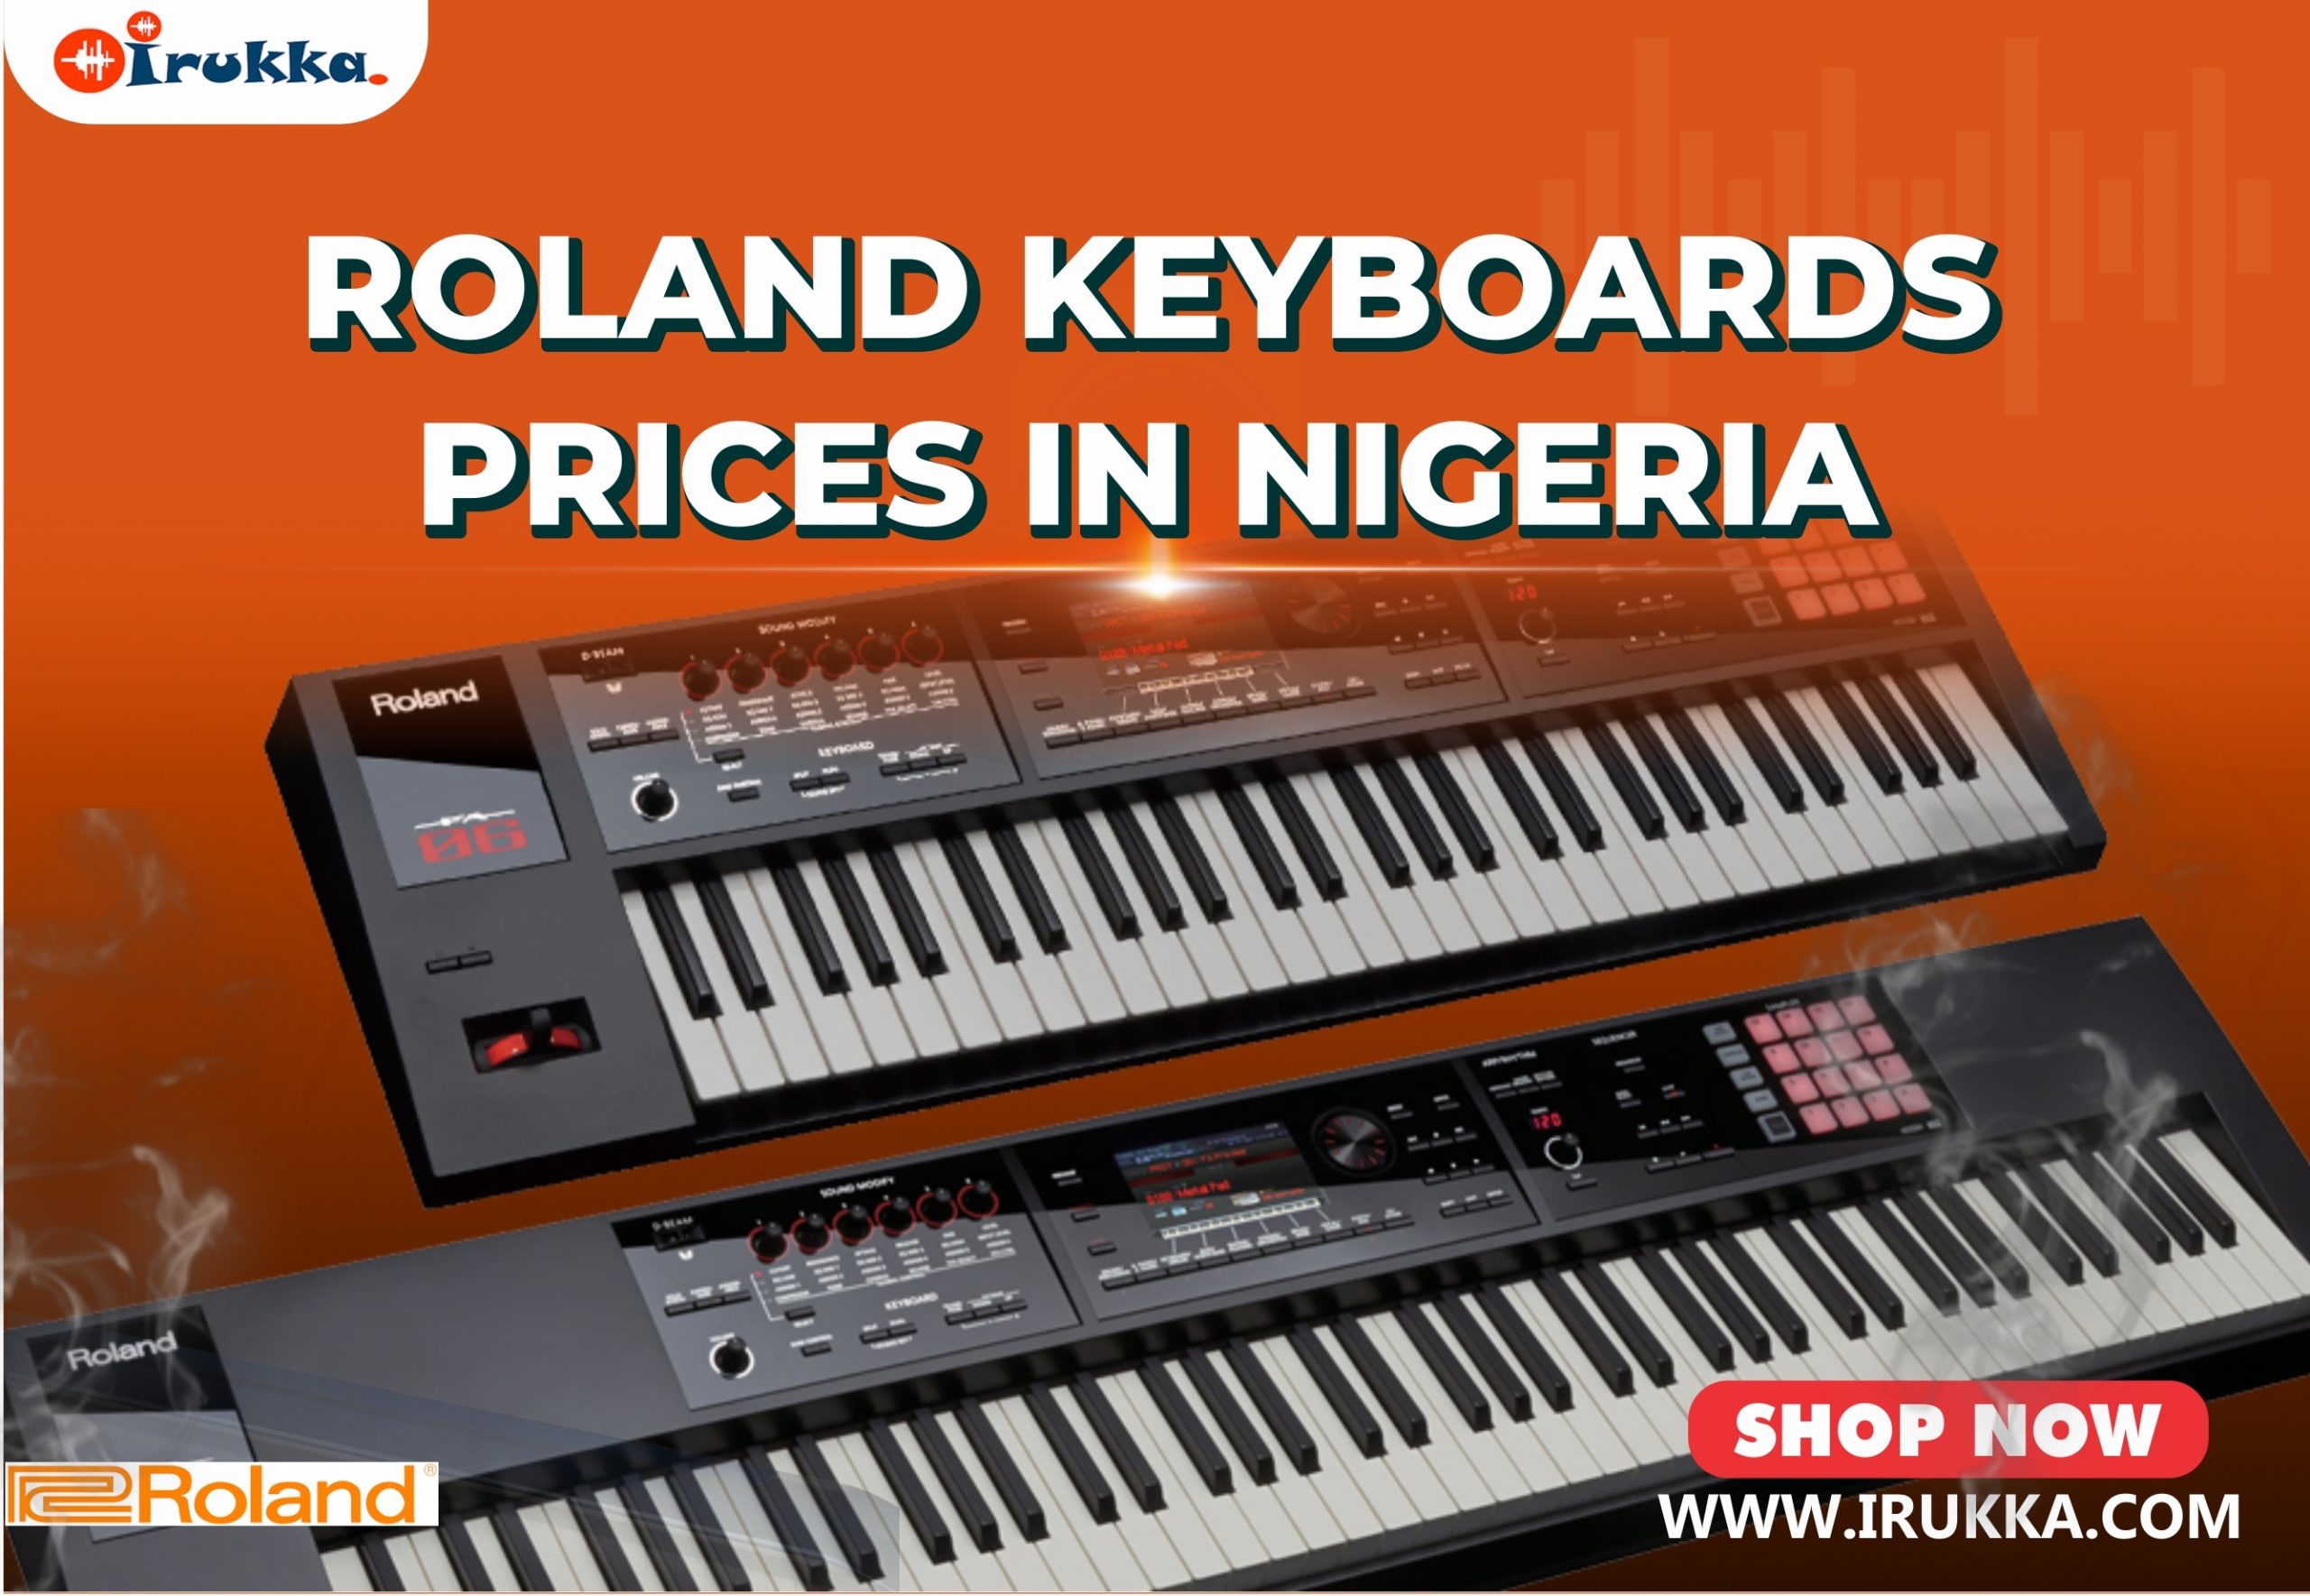 Prices of Roland Keyboards in Nigeria